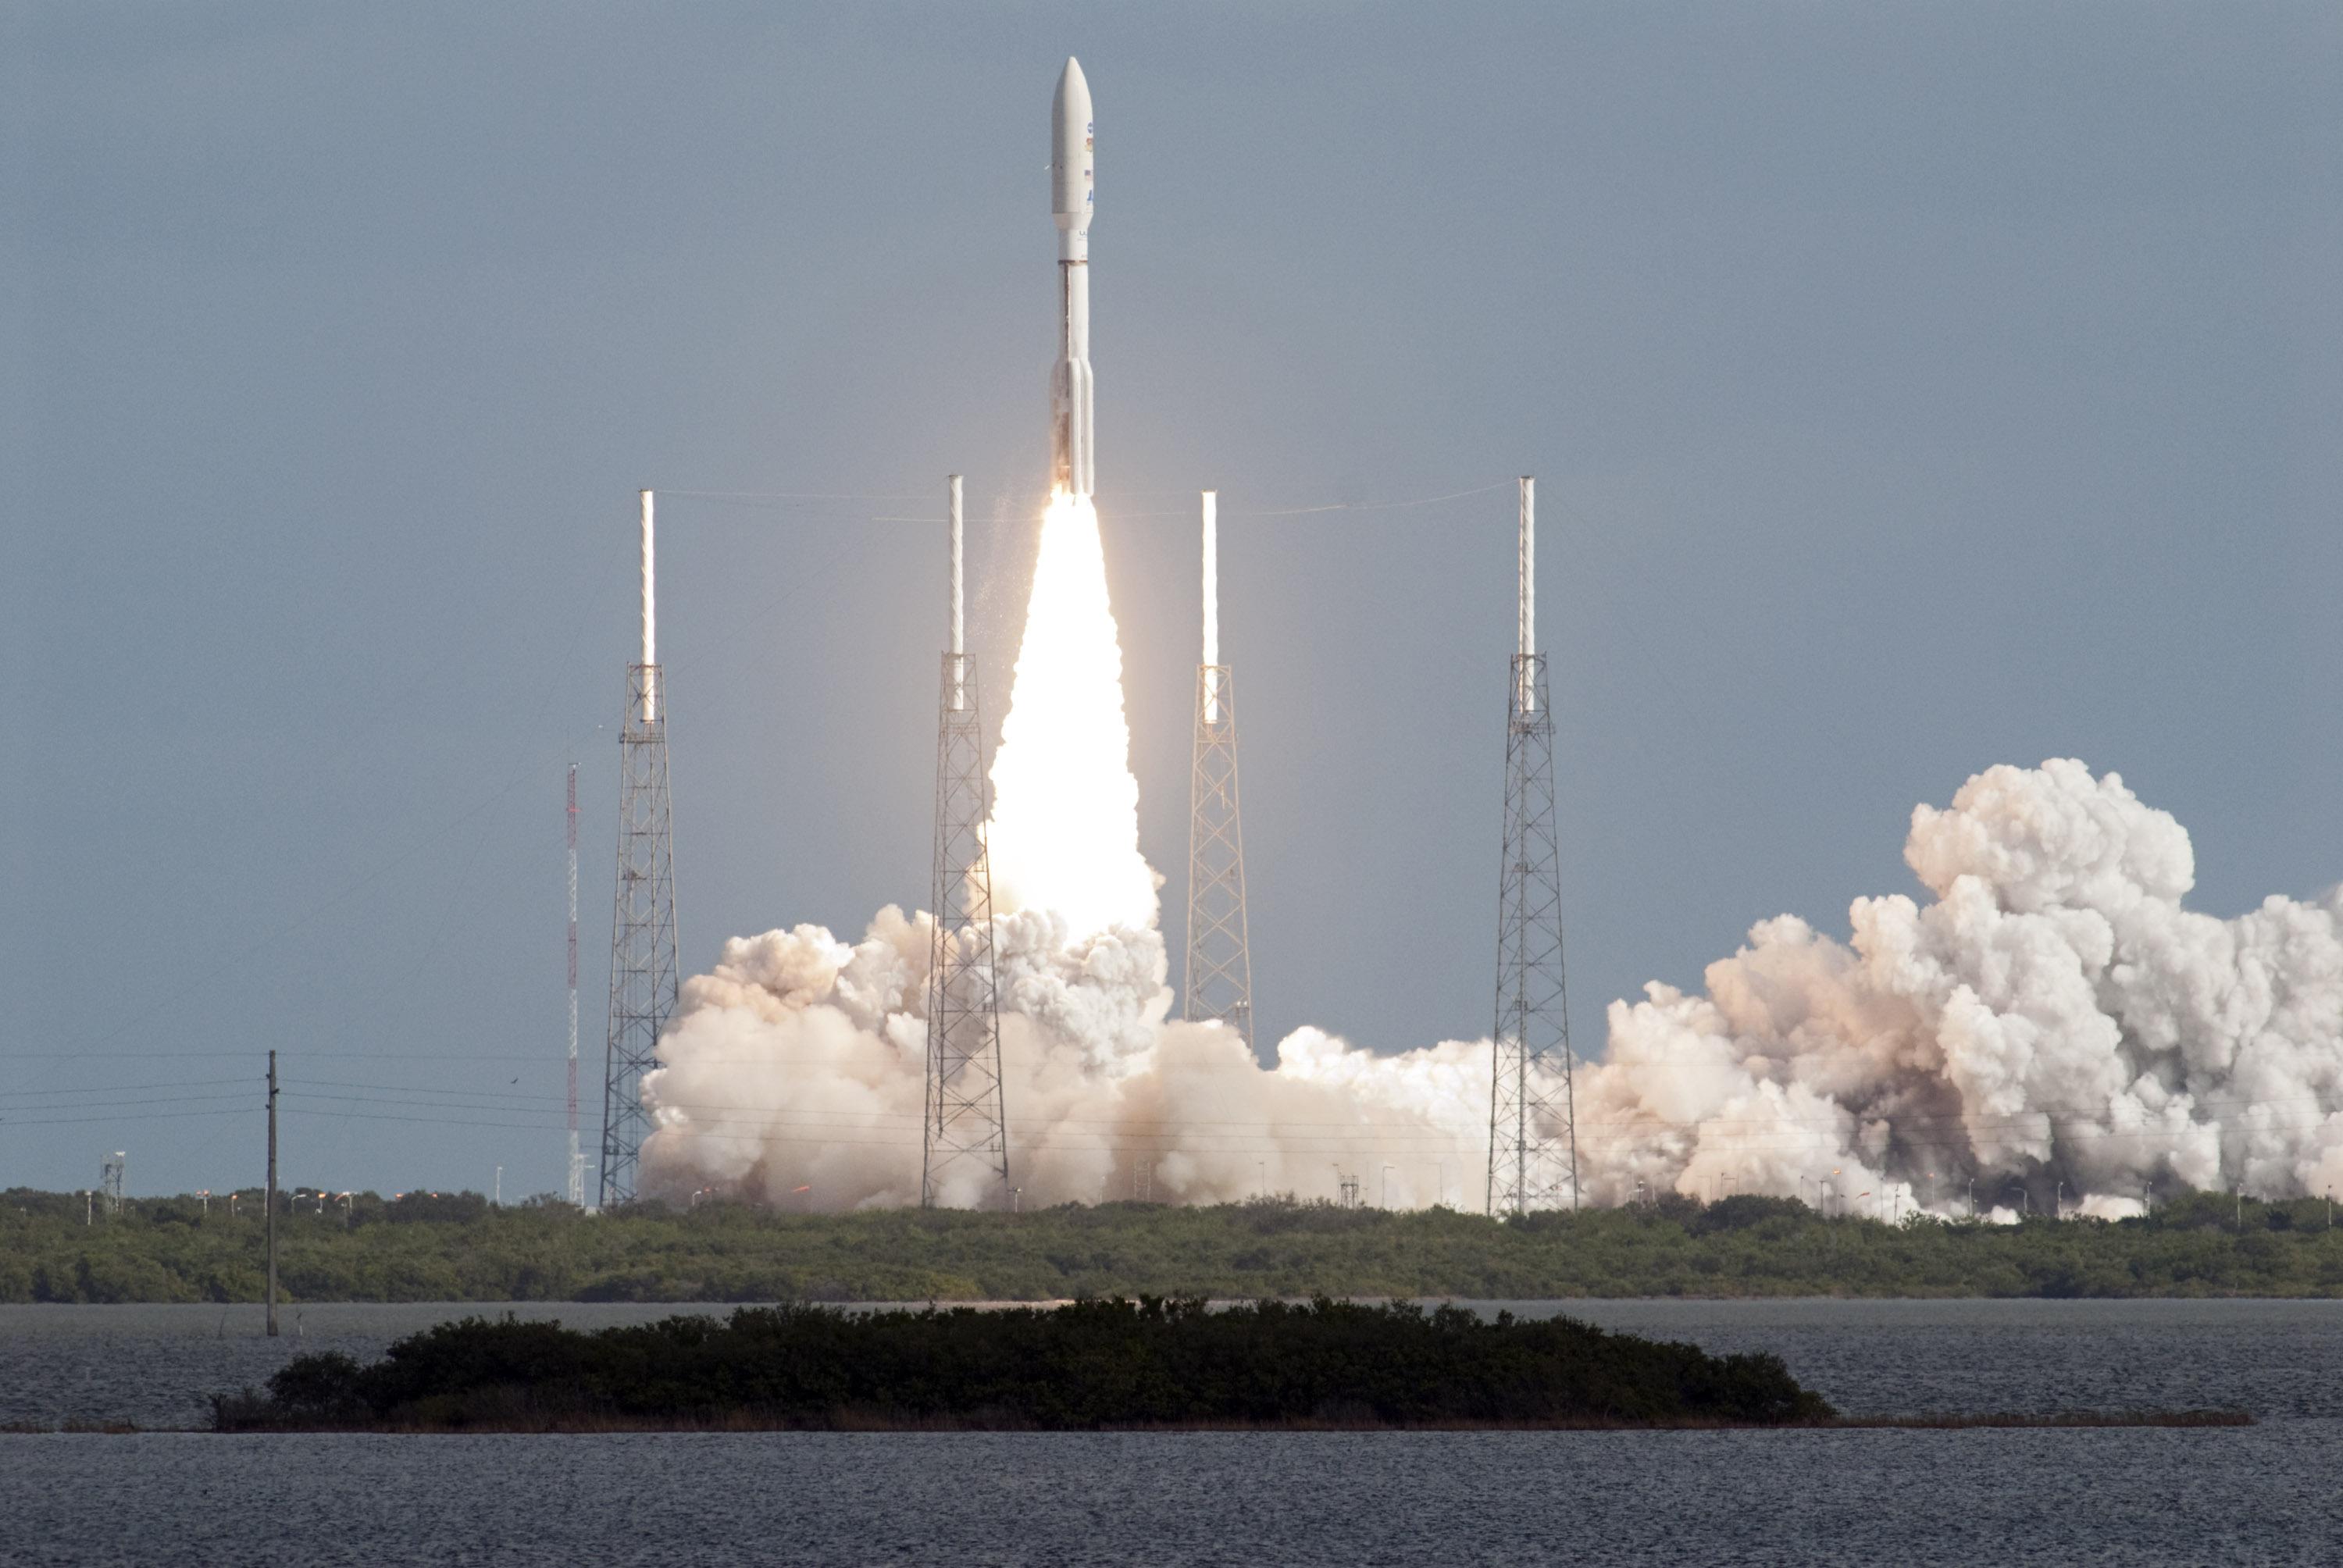 NASA's Mars Science Laboratory spacecraft, sealed inside its payload fairing atop the United Launch Alliance Atlas V rocket, clears the tower at Space Launch Complex 41 on Cape Canaveral Air Force Station in Florida.The mission lifted off at 10:02 a.m. EST (7:02 a.m. PST), Nov. 26, beginning an eight-month interplanetary cruise to Mars. The spacecraft's components include a car-sized rover, Curiosity, which has 10 science instruments designed to search for signs of life, including methane, and to help determine if this gas is from a biological or geological source.